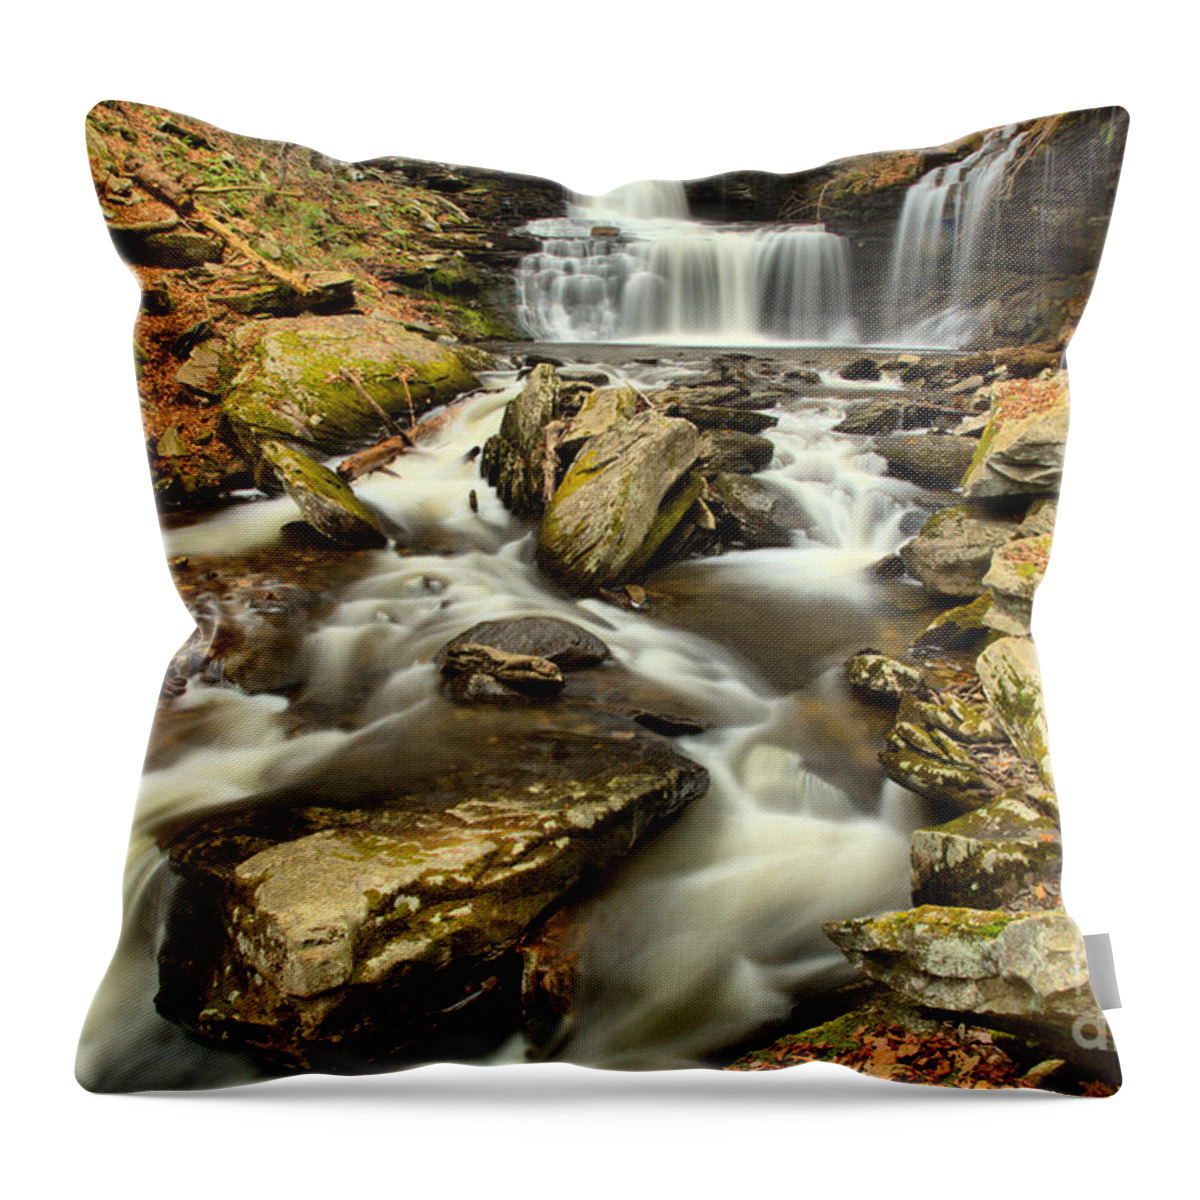 Ricketts Glen Throw Pillow featuring the photograph R B Ricketts Falls Autumn Landscape by Adam Jewell